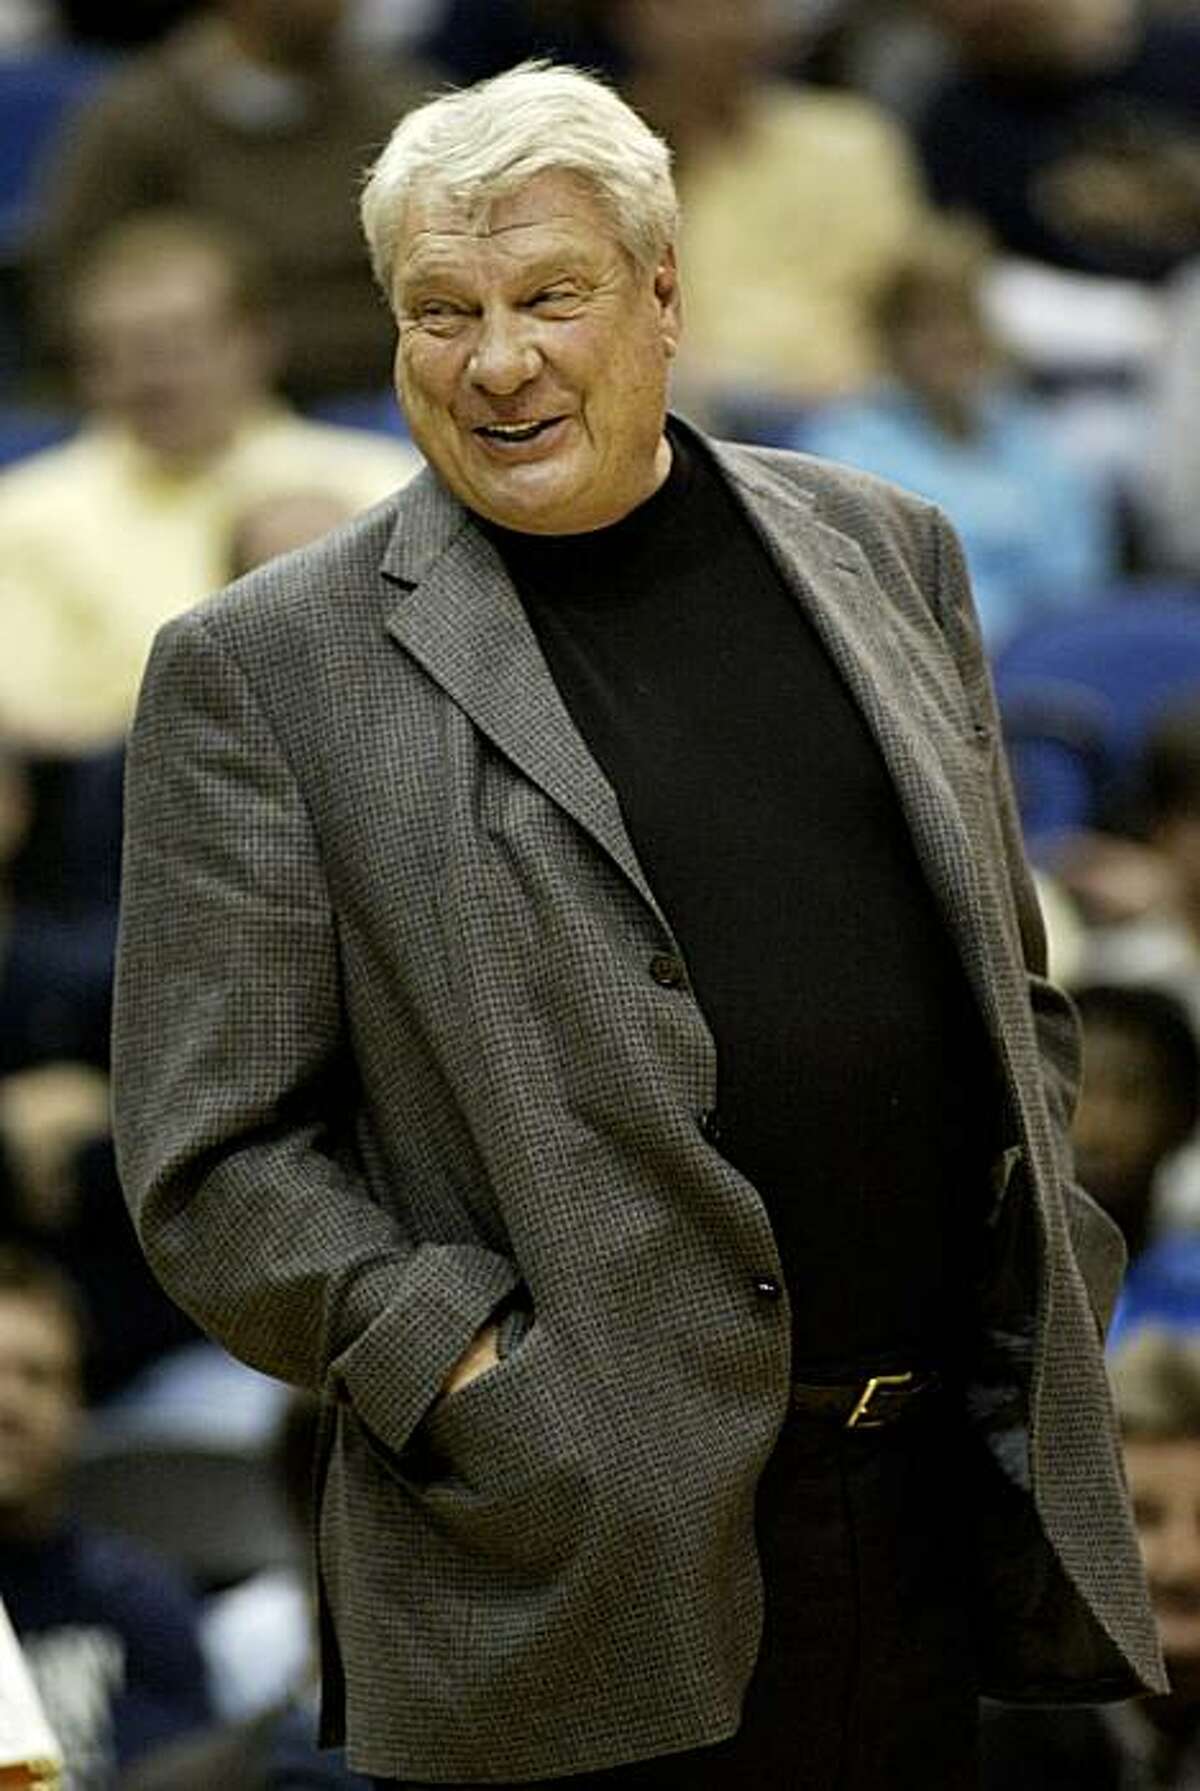 FILE - In this April 7, 2010, file photo, Golden State Warriors coach Don Nelson smiles on the sideline during the first half of an NBA basketball game in Minneapolis. Nelson is expected to part ways with the Warriors on Monday, an NBA source tells The Associated Press.